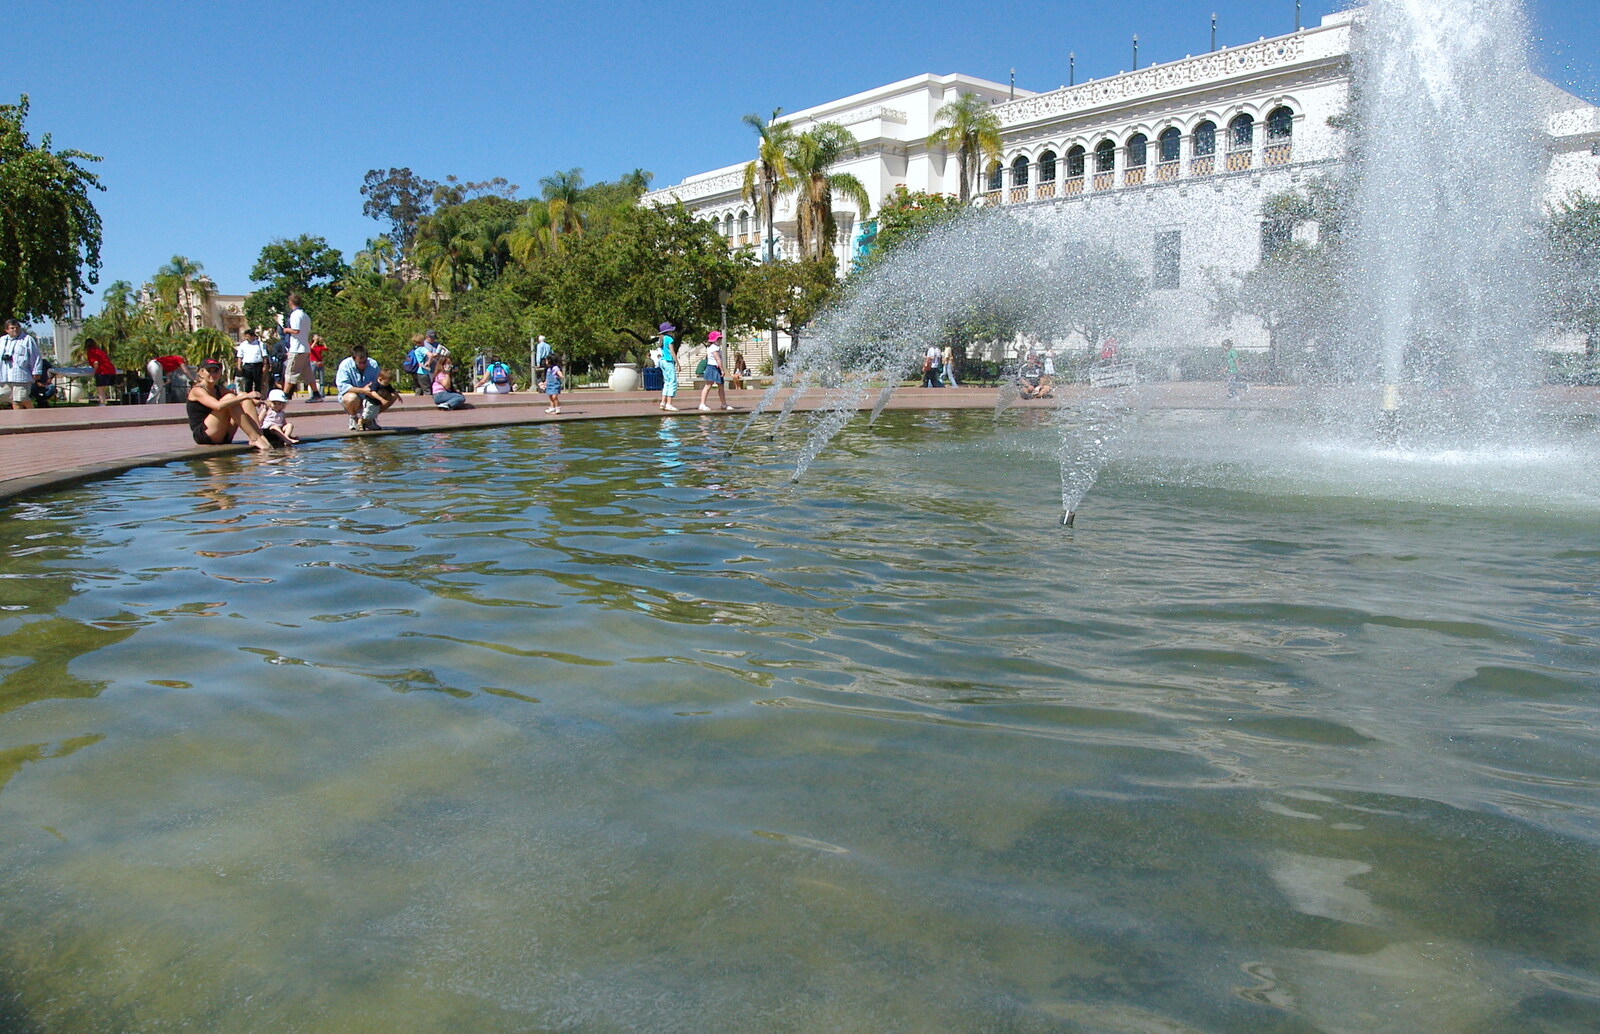 Scenes and People of Balboa Park, San Diego, California - 25th September 2005: A fountain